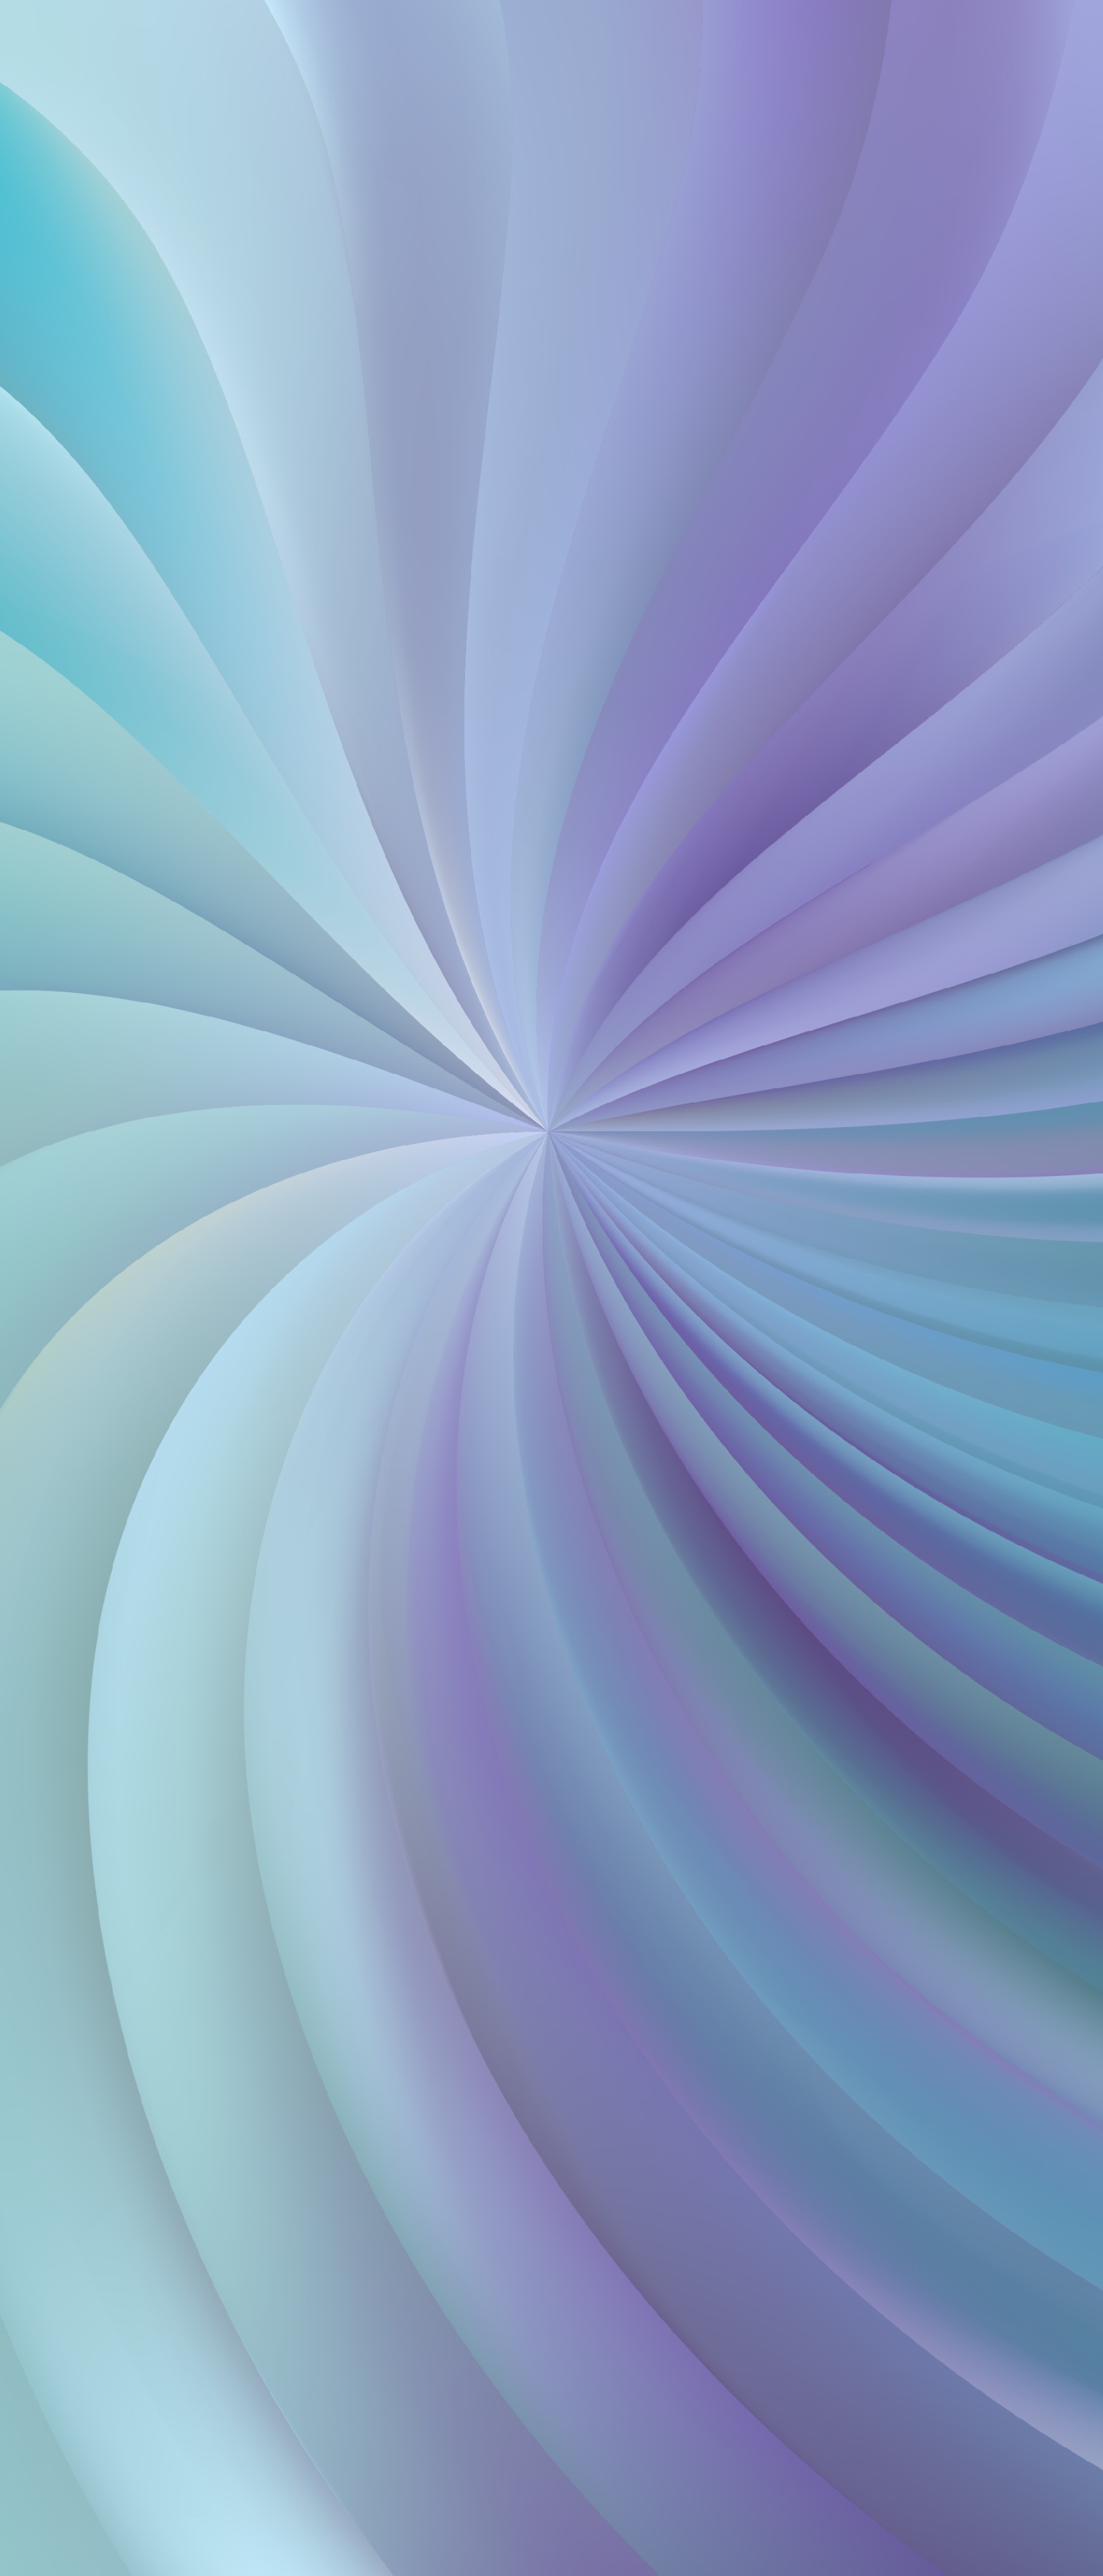 A purple and blue abstract spiral - Pastel rainbow